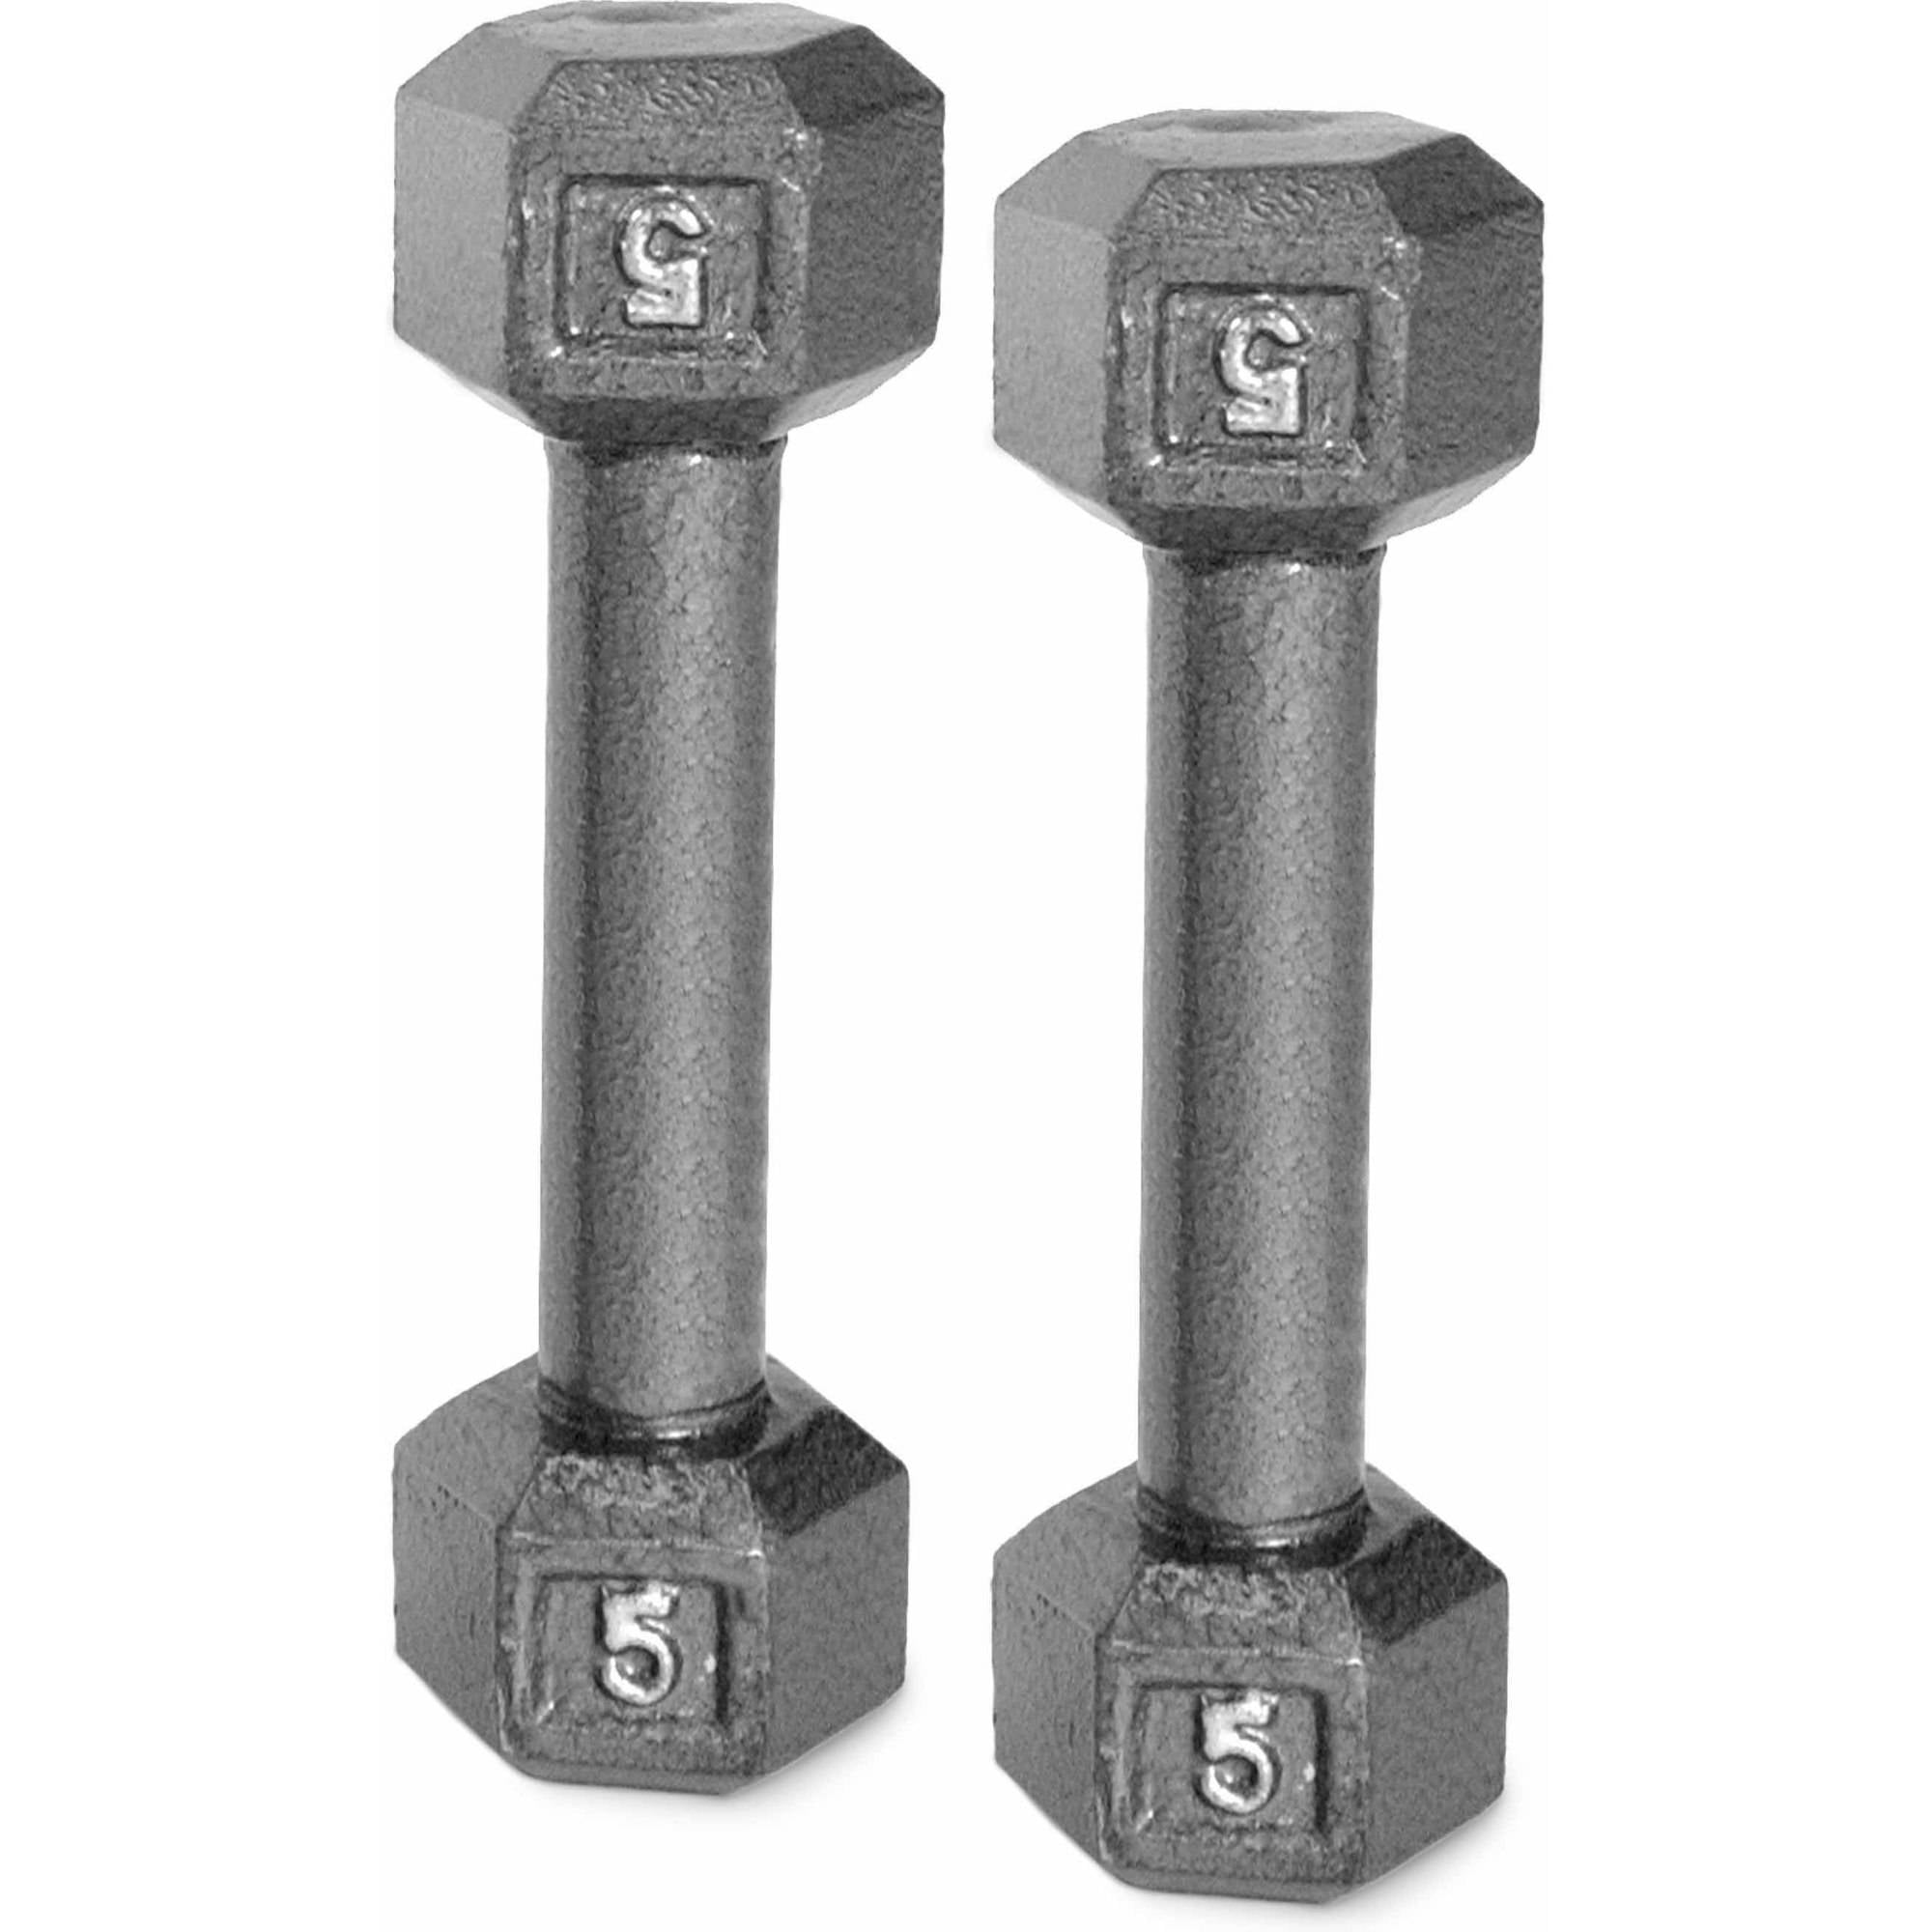 Hex Dumbbells New USA Sports Cast Iron Gray Pair 2 X 10 lbs Home Gym 2 X IHD-010 